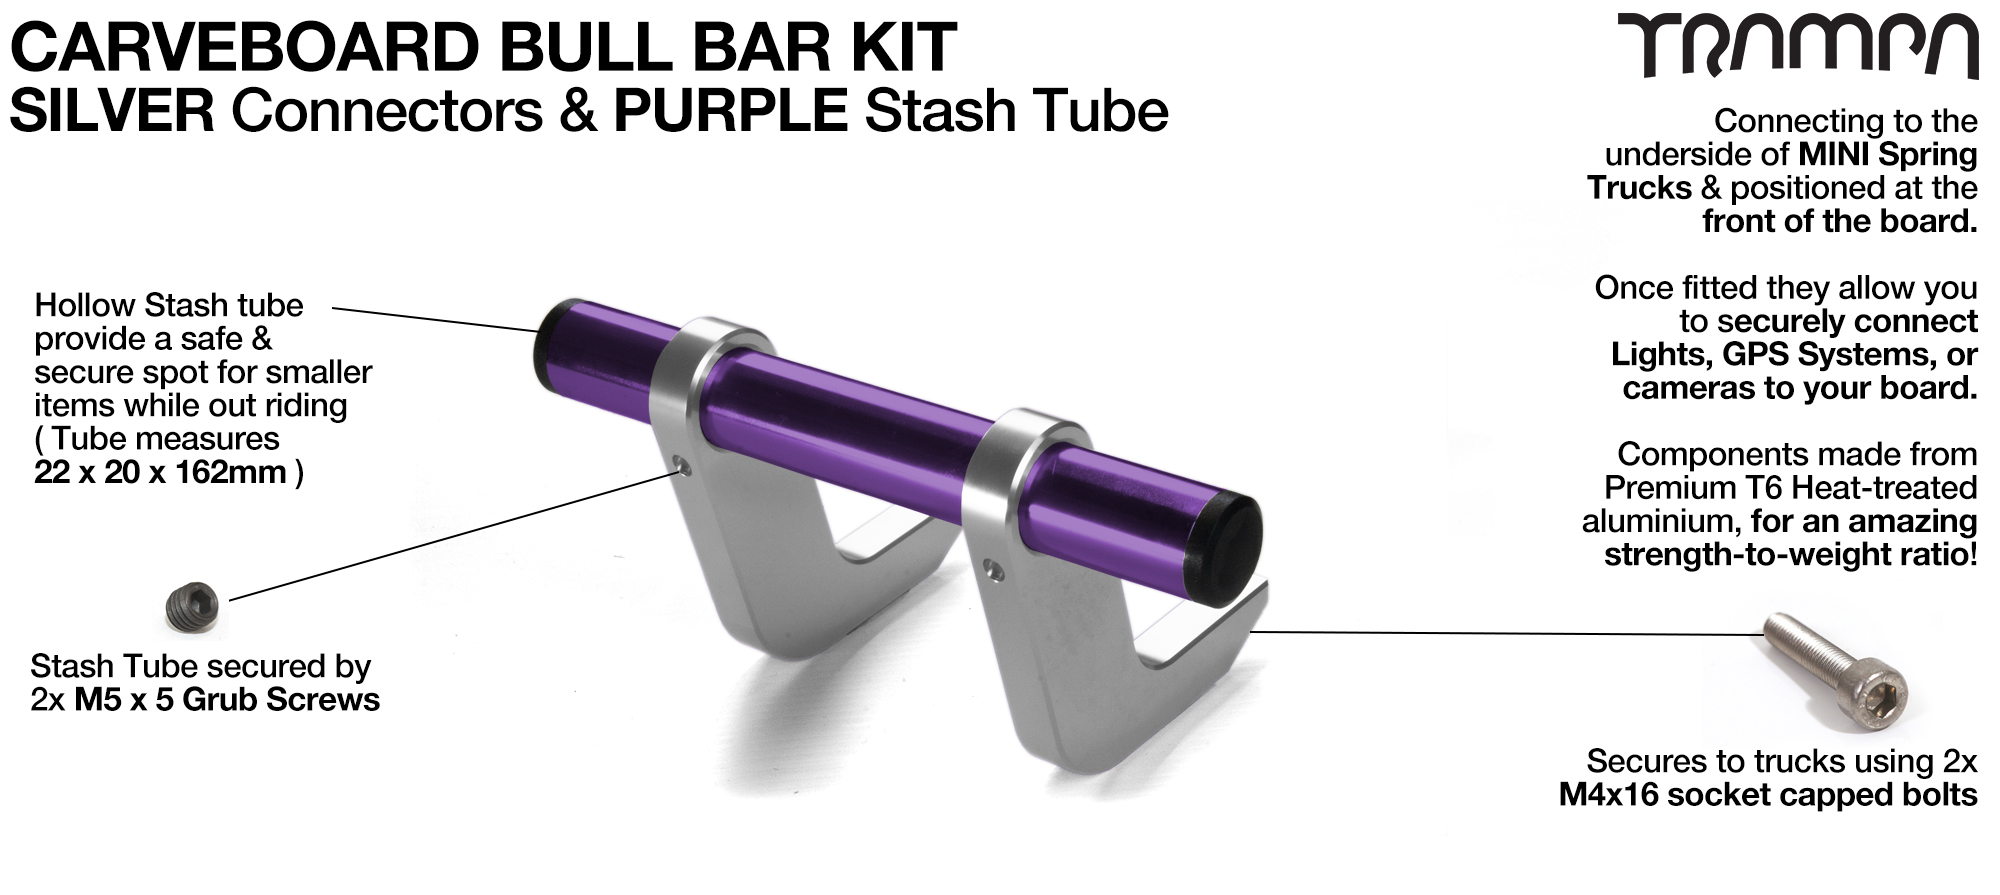 SILVER Uprights & PURPLE Crossbar BULL BARS for CARVE BOARDS using T6 Heat Treated CNC'd Aluminum Clamps, Hollow Aluminium Stash Tubes with Rubber end bungs  